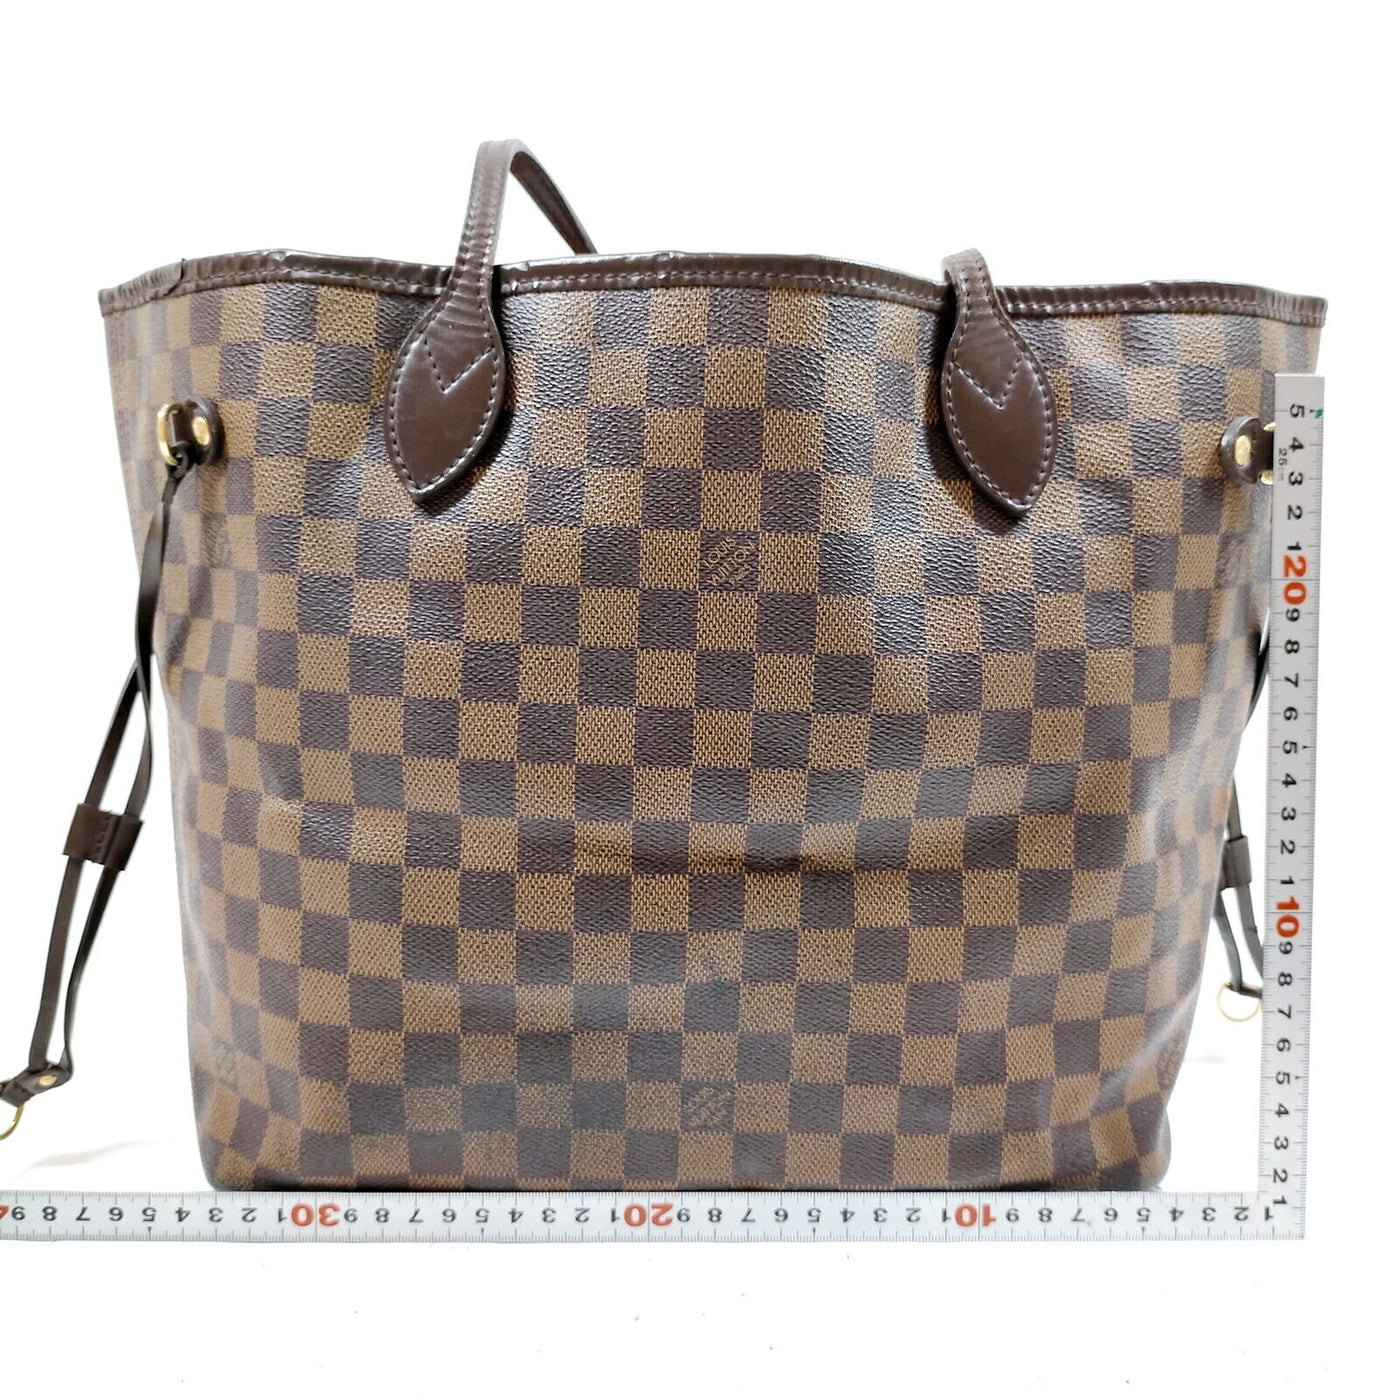 Louis Vuitton Neverfull MM Brown Damier Tote Bag - Luxury Cheaper